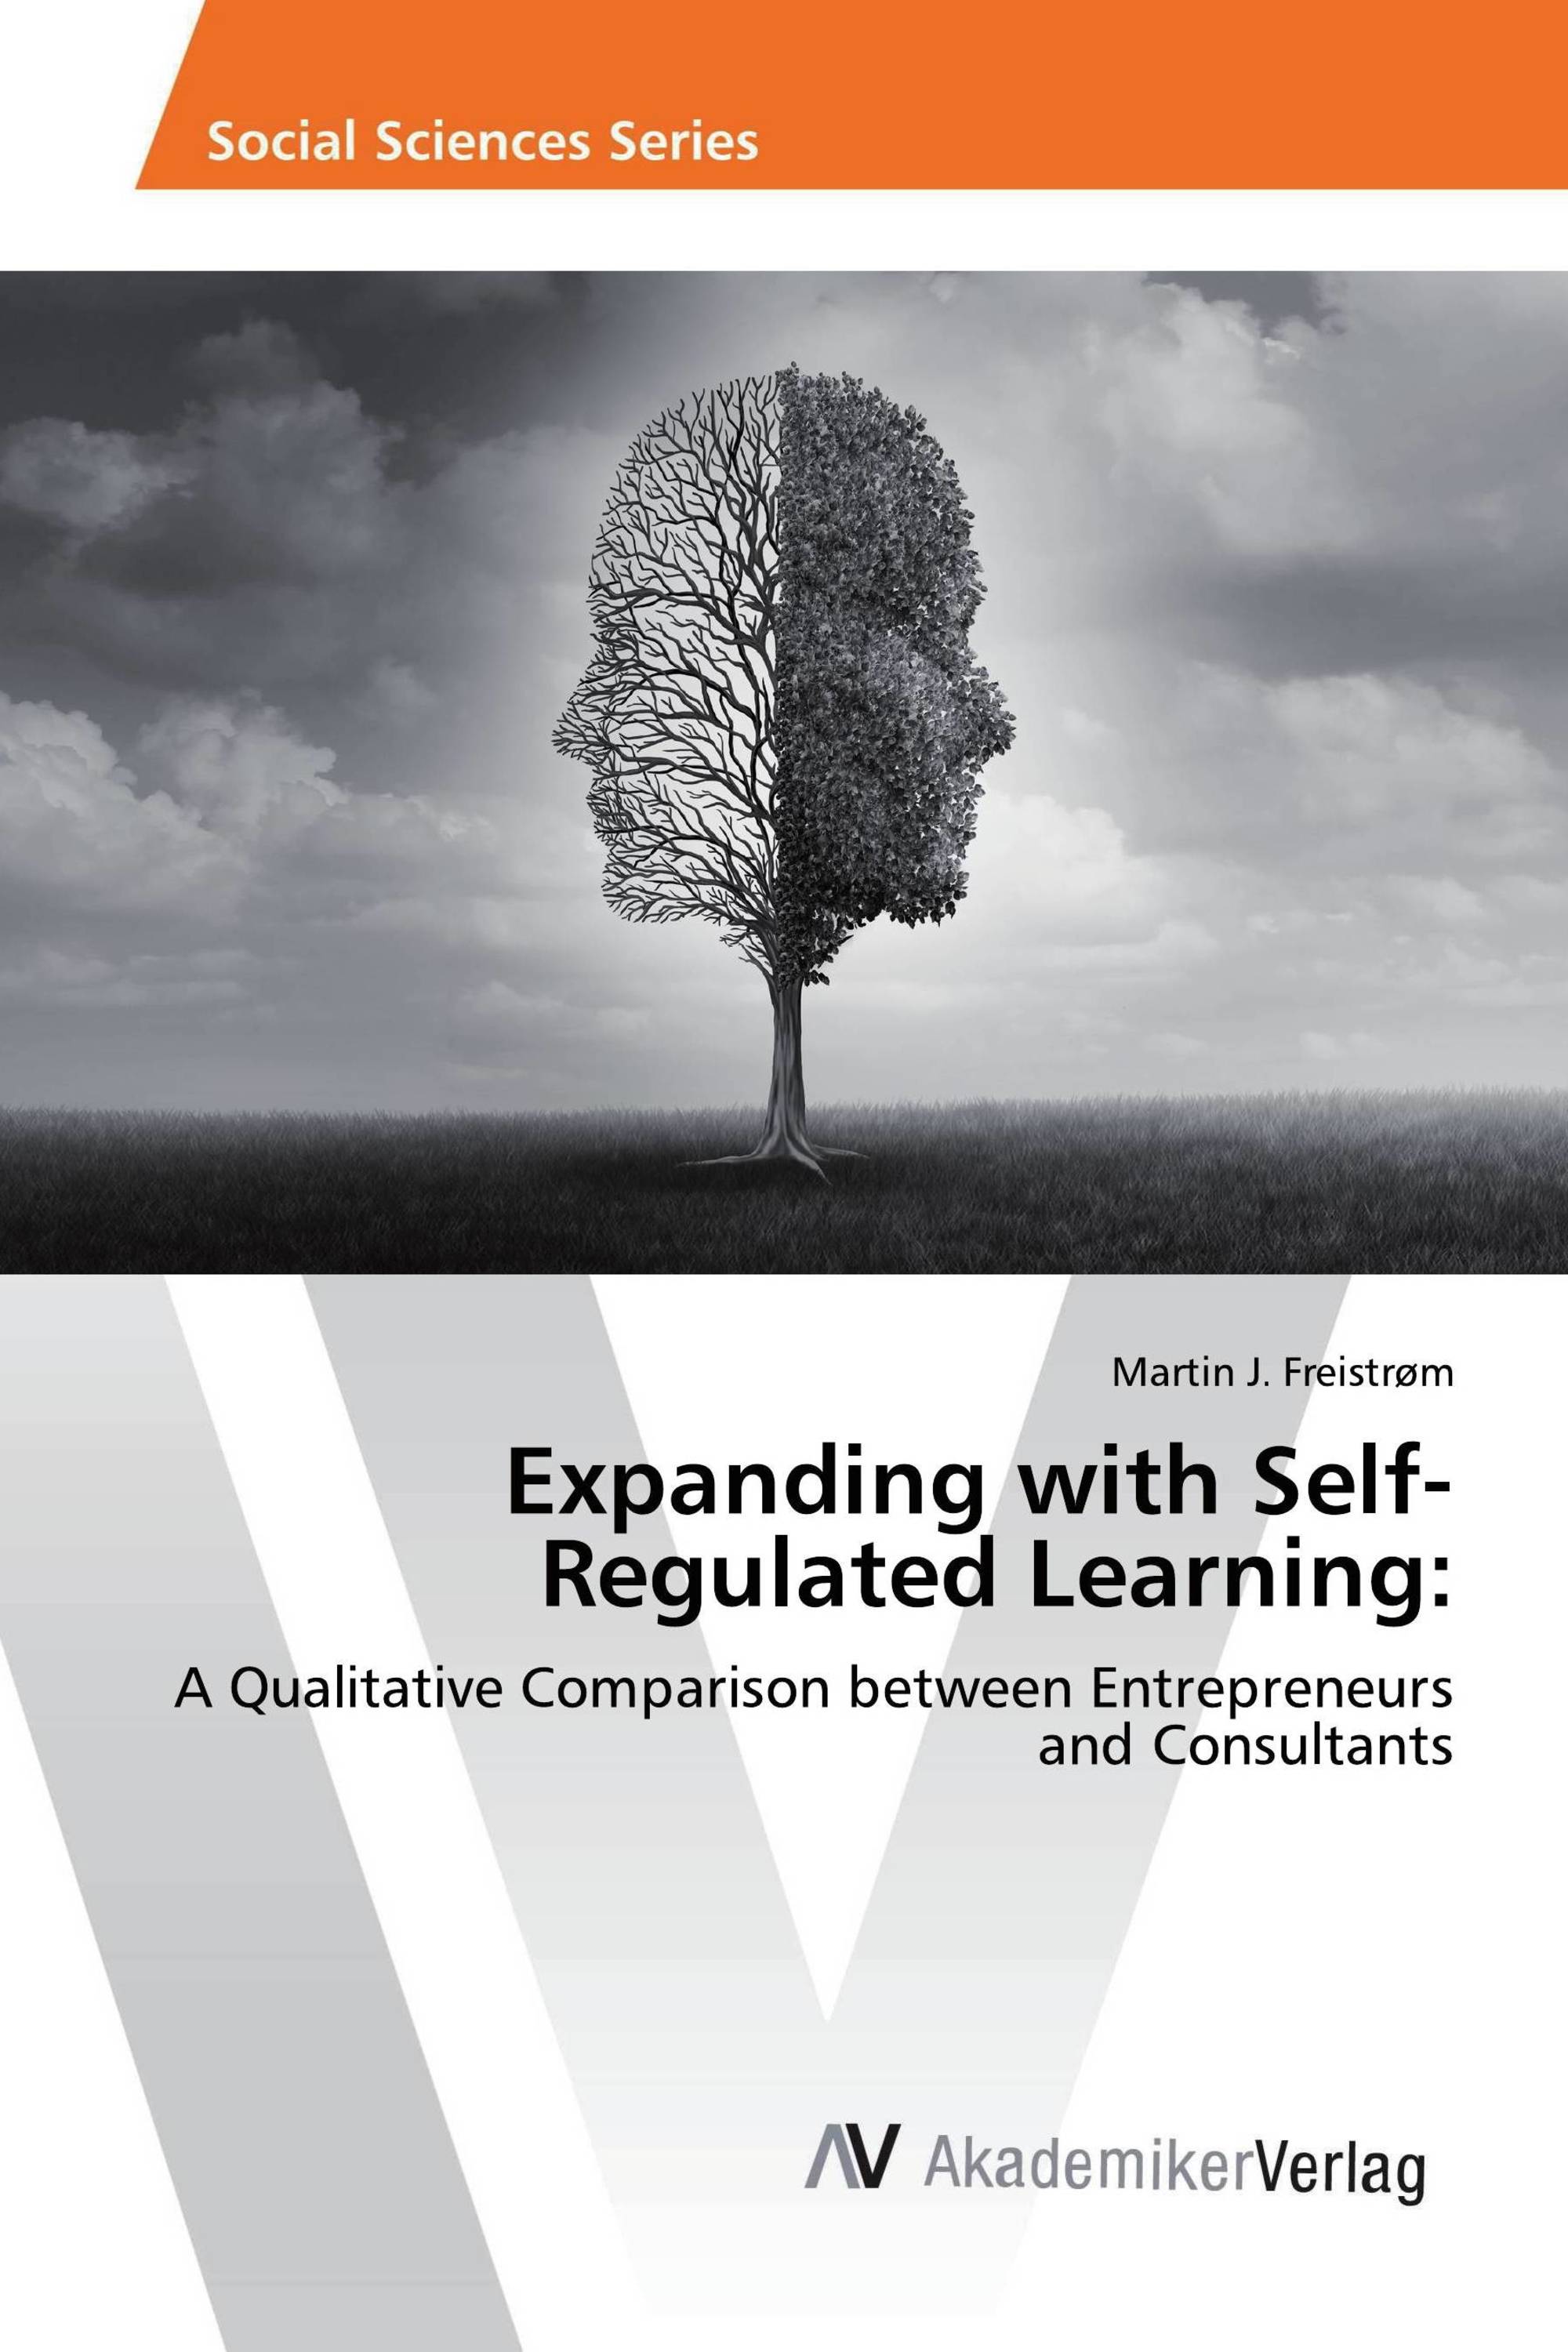 Expanding with Self-Regulated Learning: